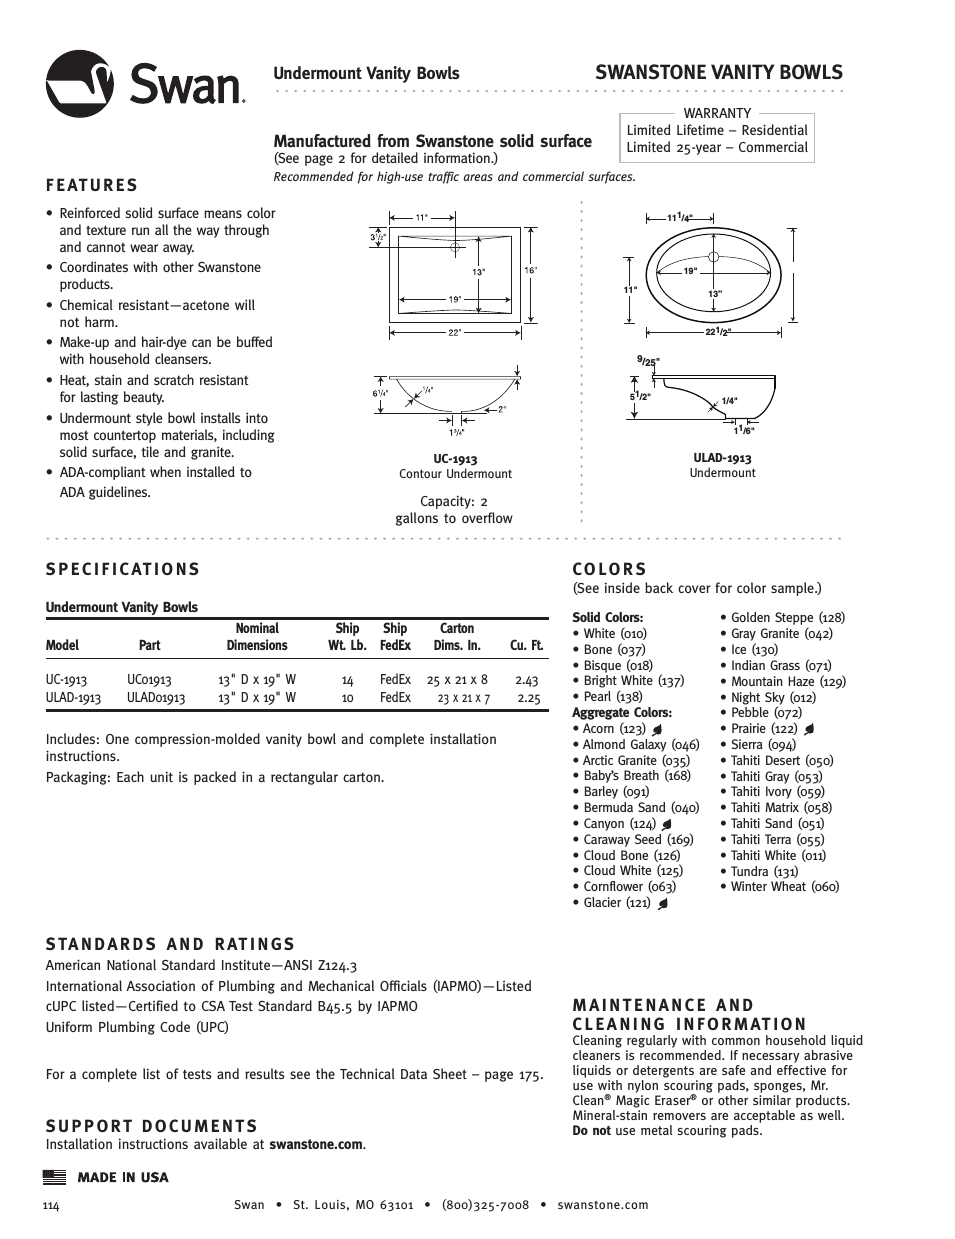 ULAD-1913 - Specification